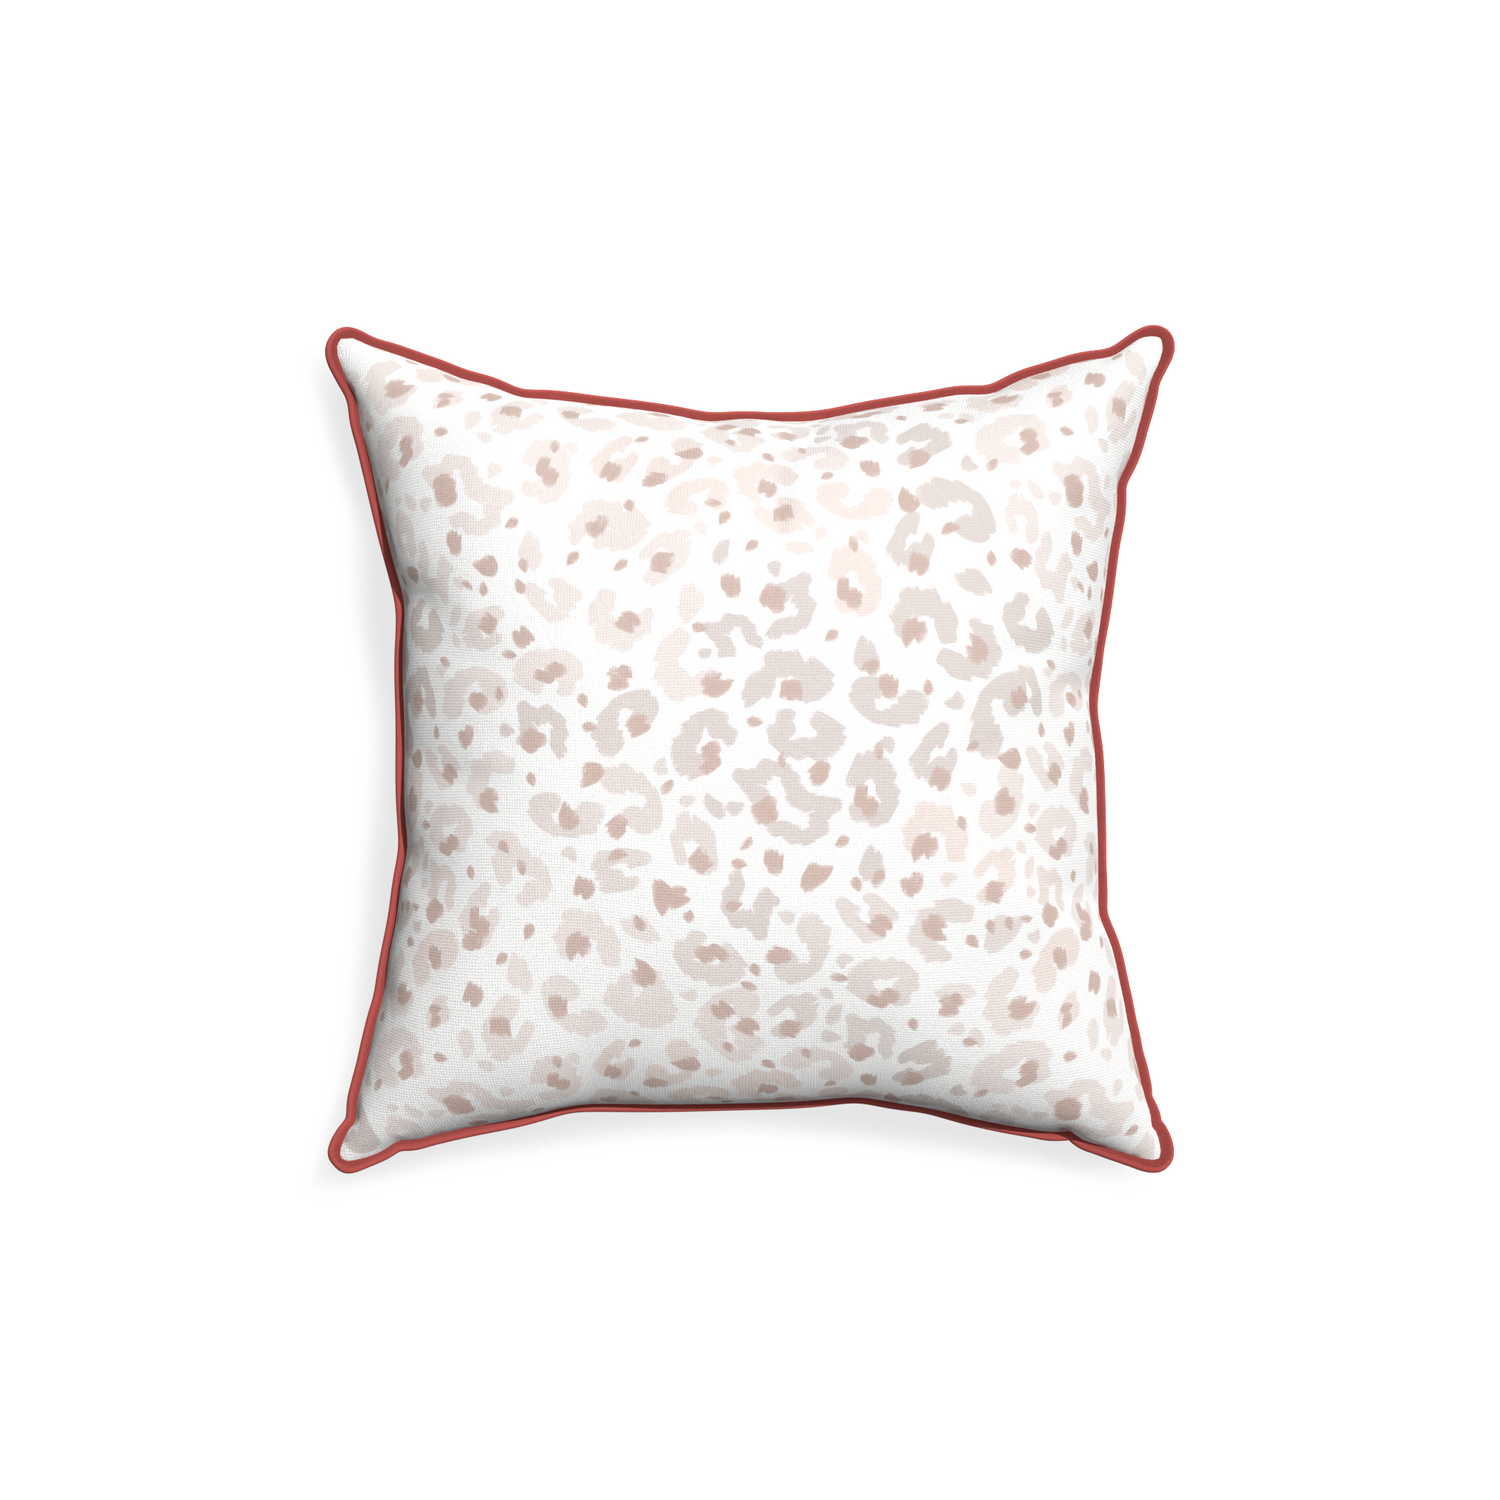 18-square rosie custom pillow with c piping on white background